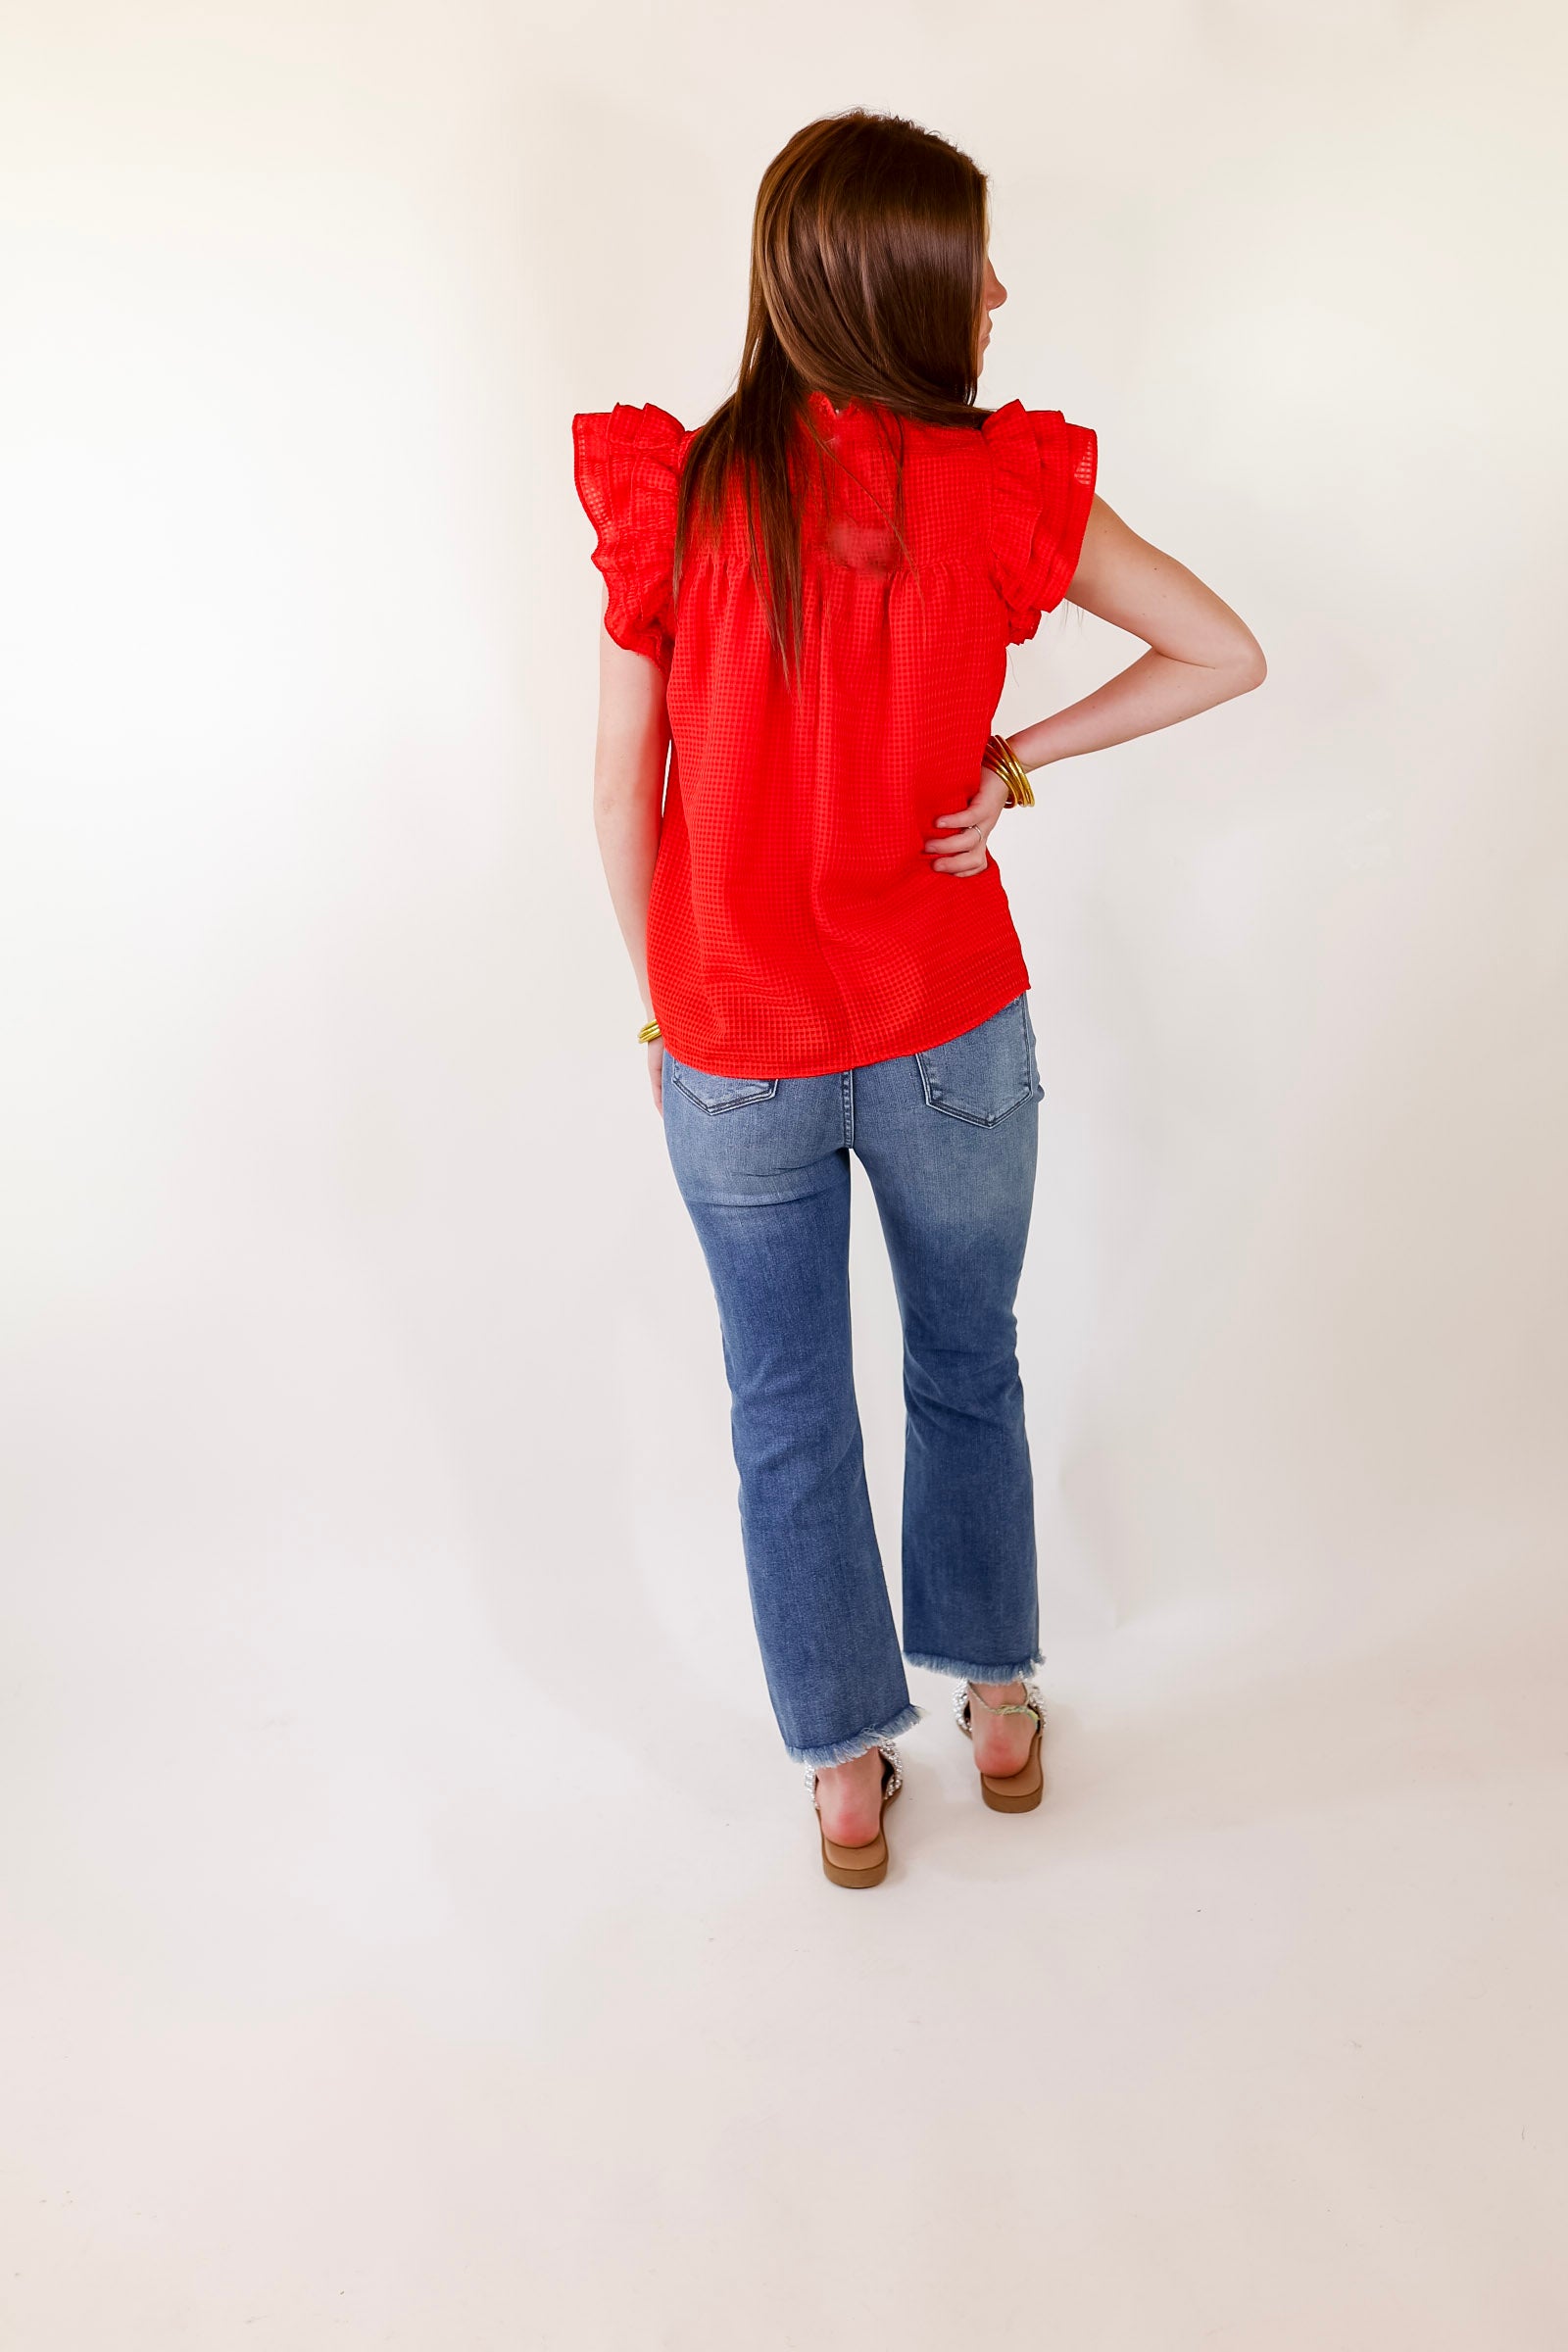 Perfectly Fabulous Ruffle Cap Sleeve Top in Red - Giddy Up Glamour Boutique